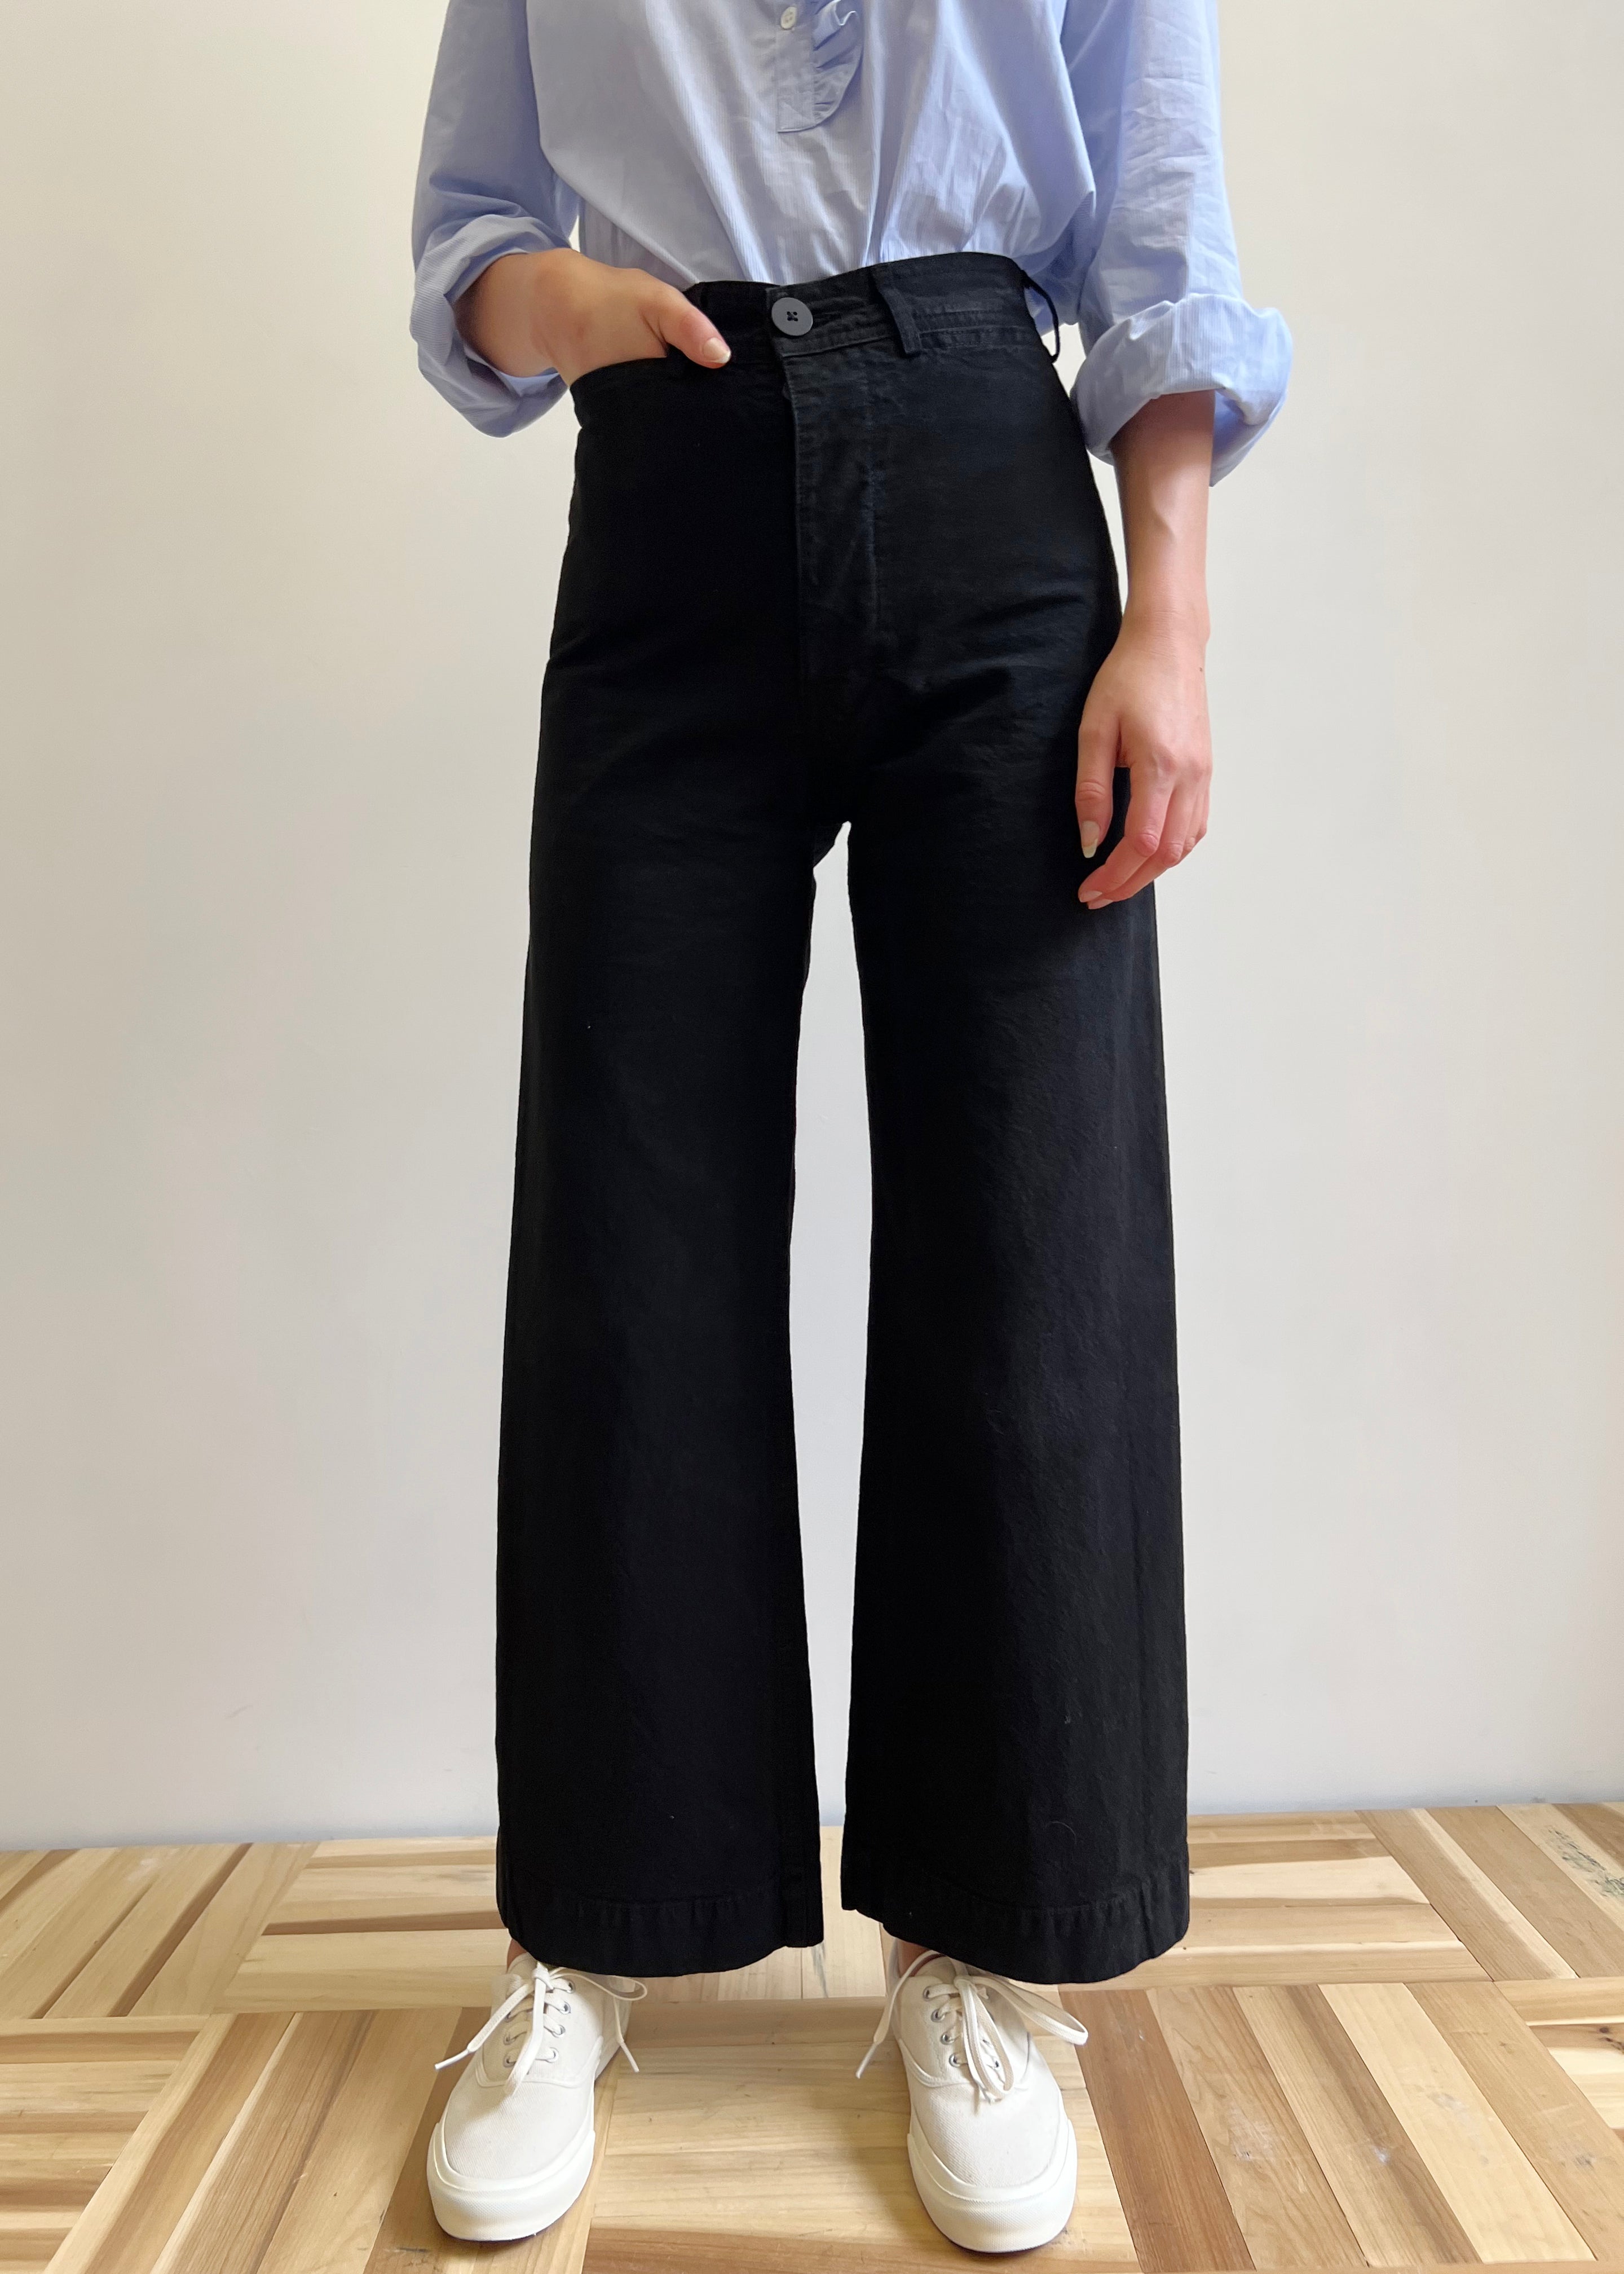 Jesse Kamm  Sailor Pant in Clay  Oroboro Store  New York NY